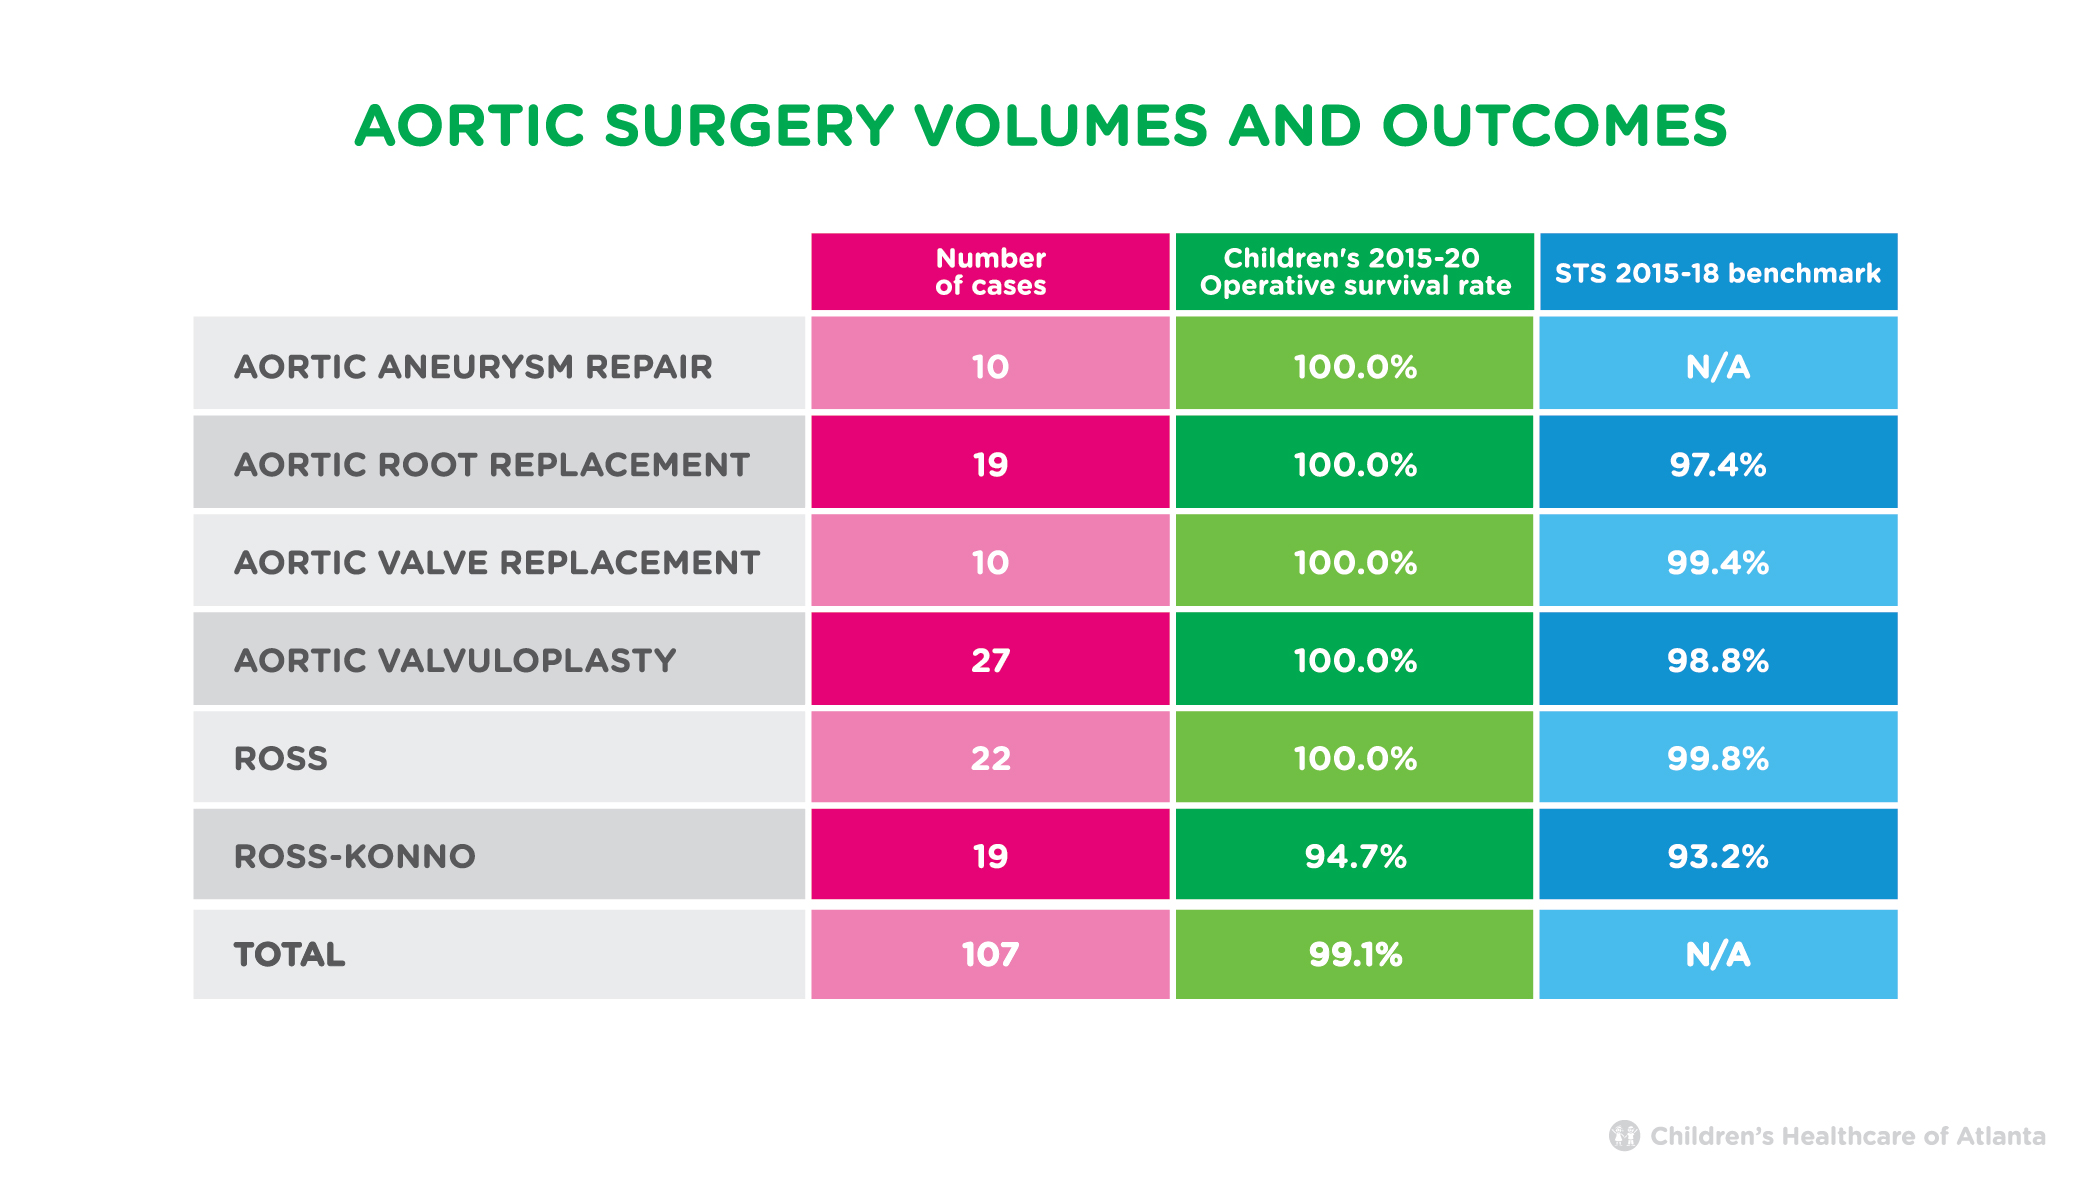 Aortic Surgery Volumes and Outcomes